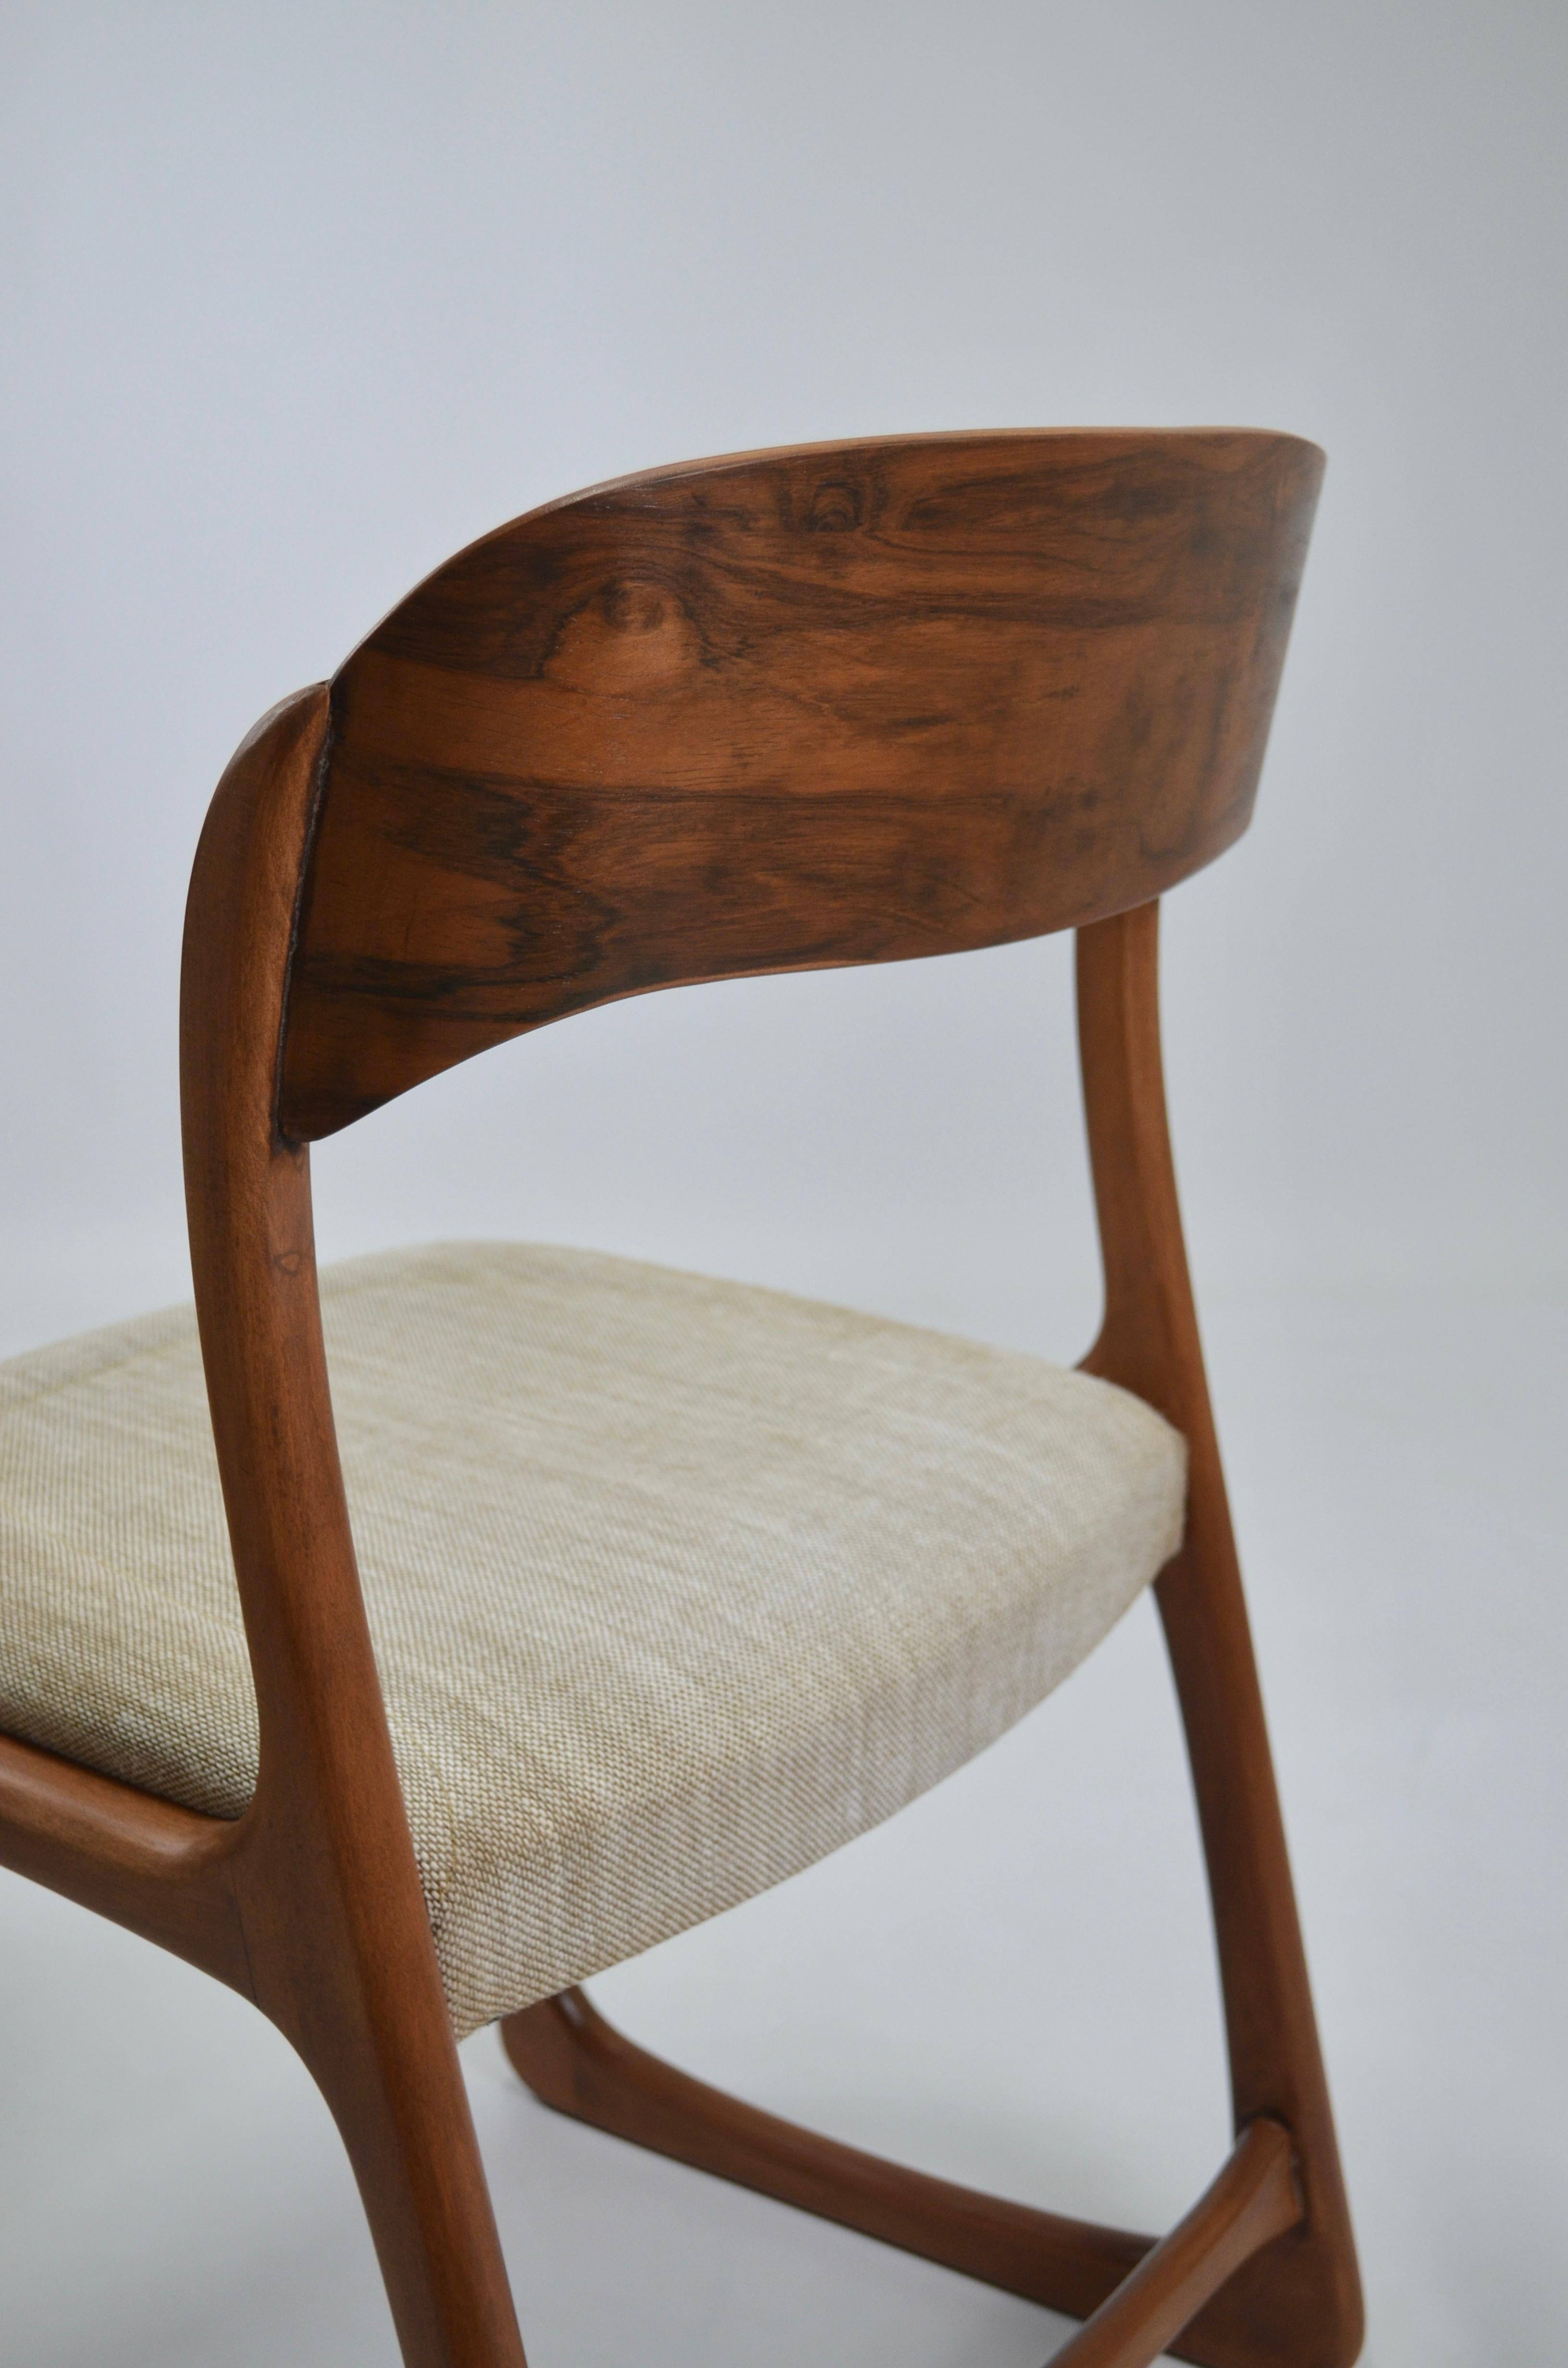 Vintage French Traineau or Sleigh Dining Chairs, Baumann, France, 60s For Sale 7